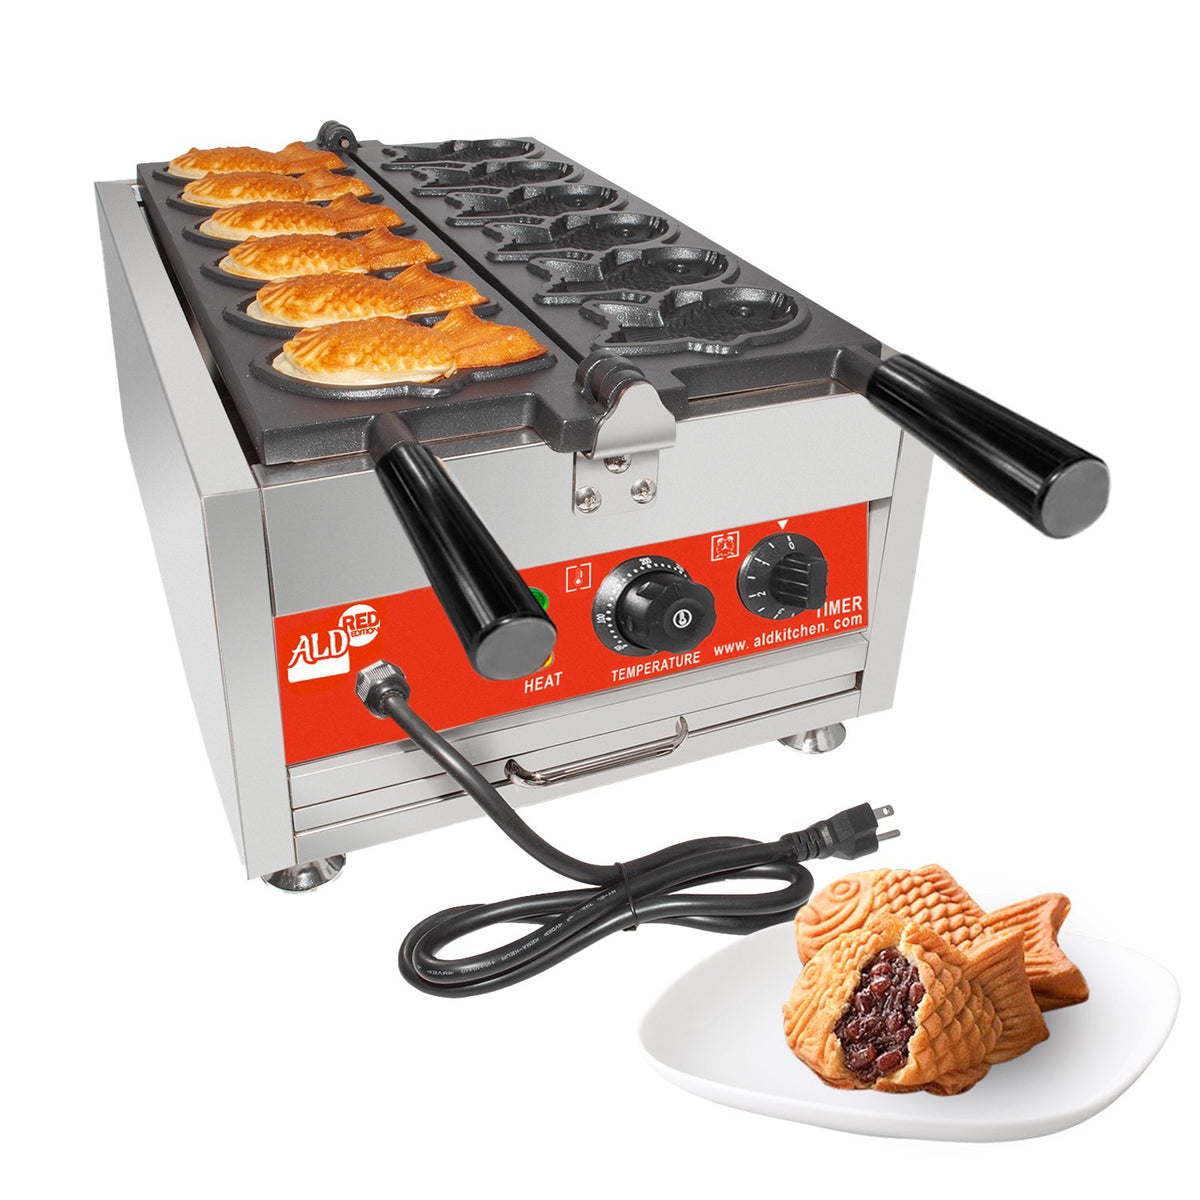 ALDKitchen Waffle Dog Maker Corn Dog Maker with Red Panel for Business Stainless Steel Waffles on a Stick 110V (6 Waffles) - 1